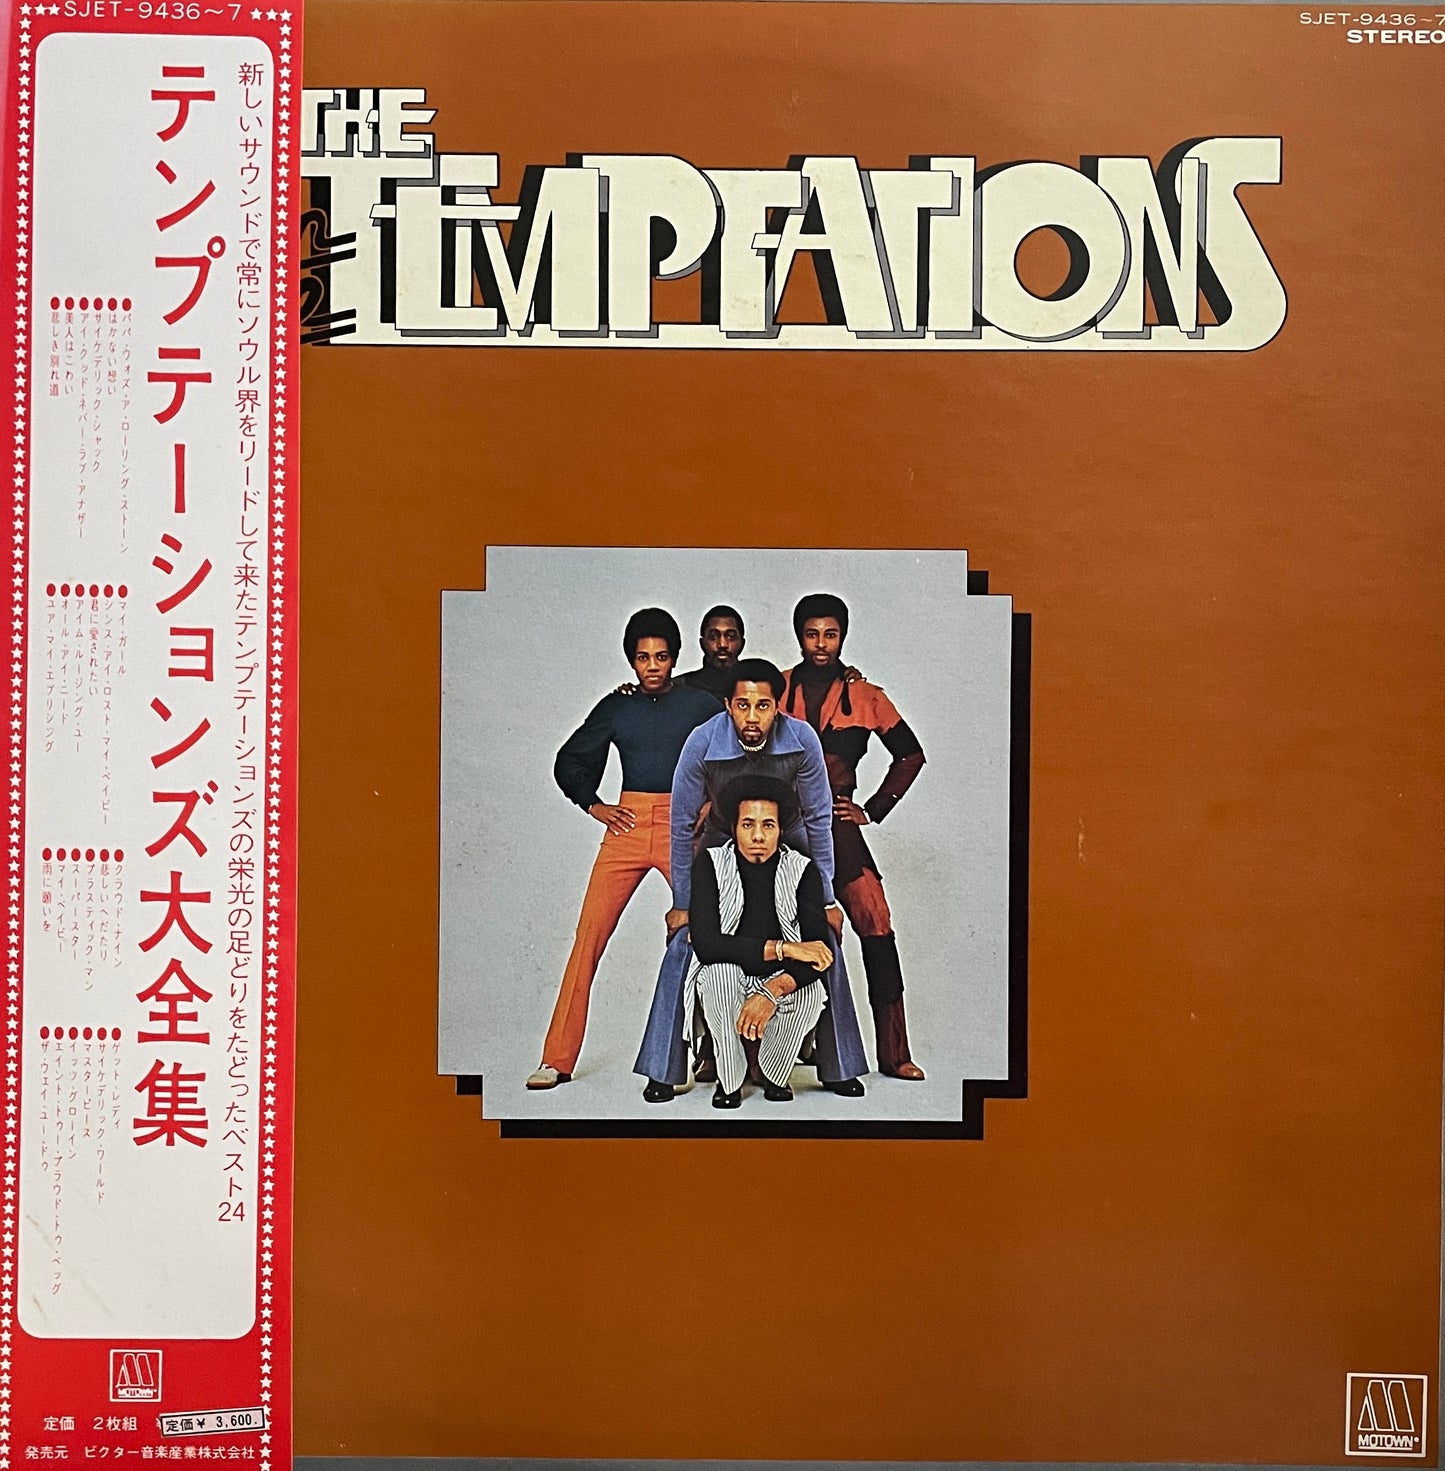 The Temptations "Twin Deluxe" (1973)